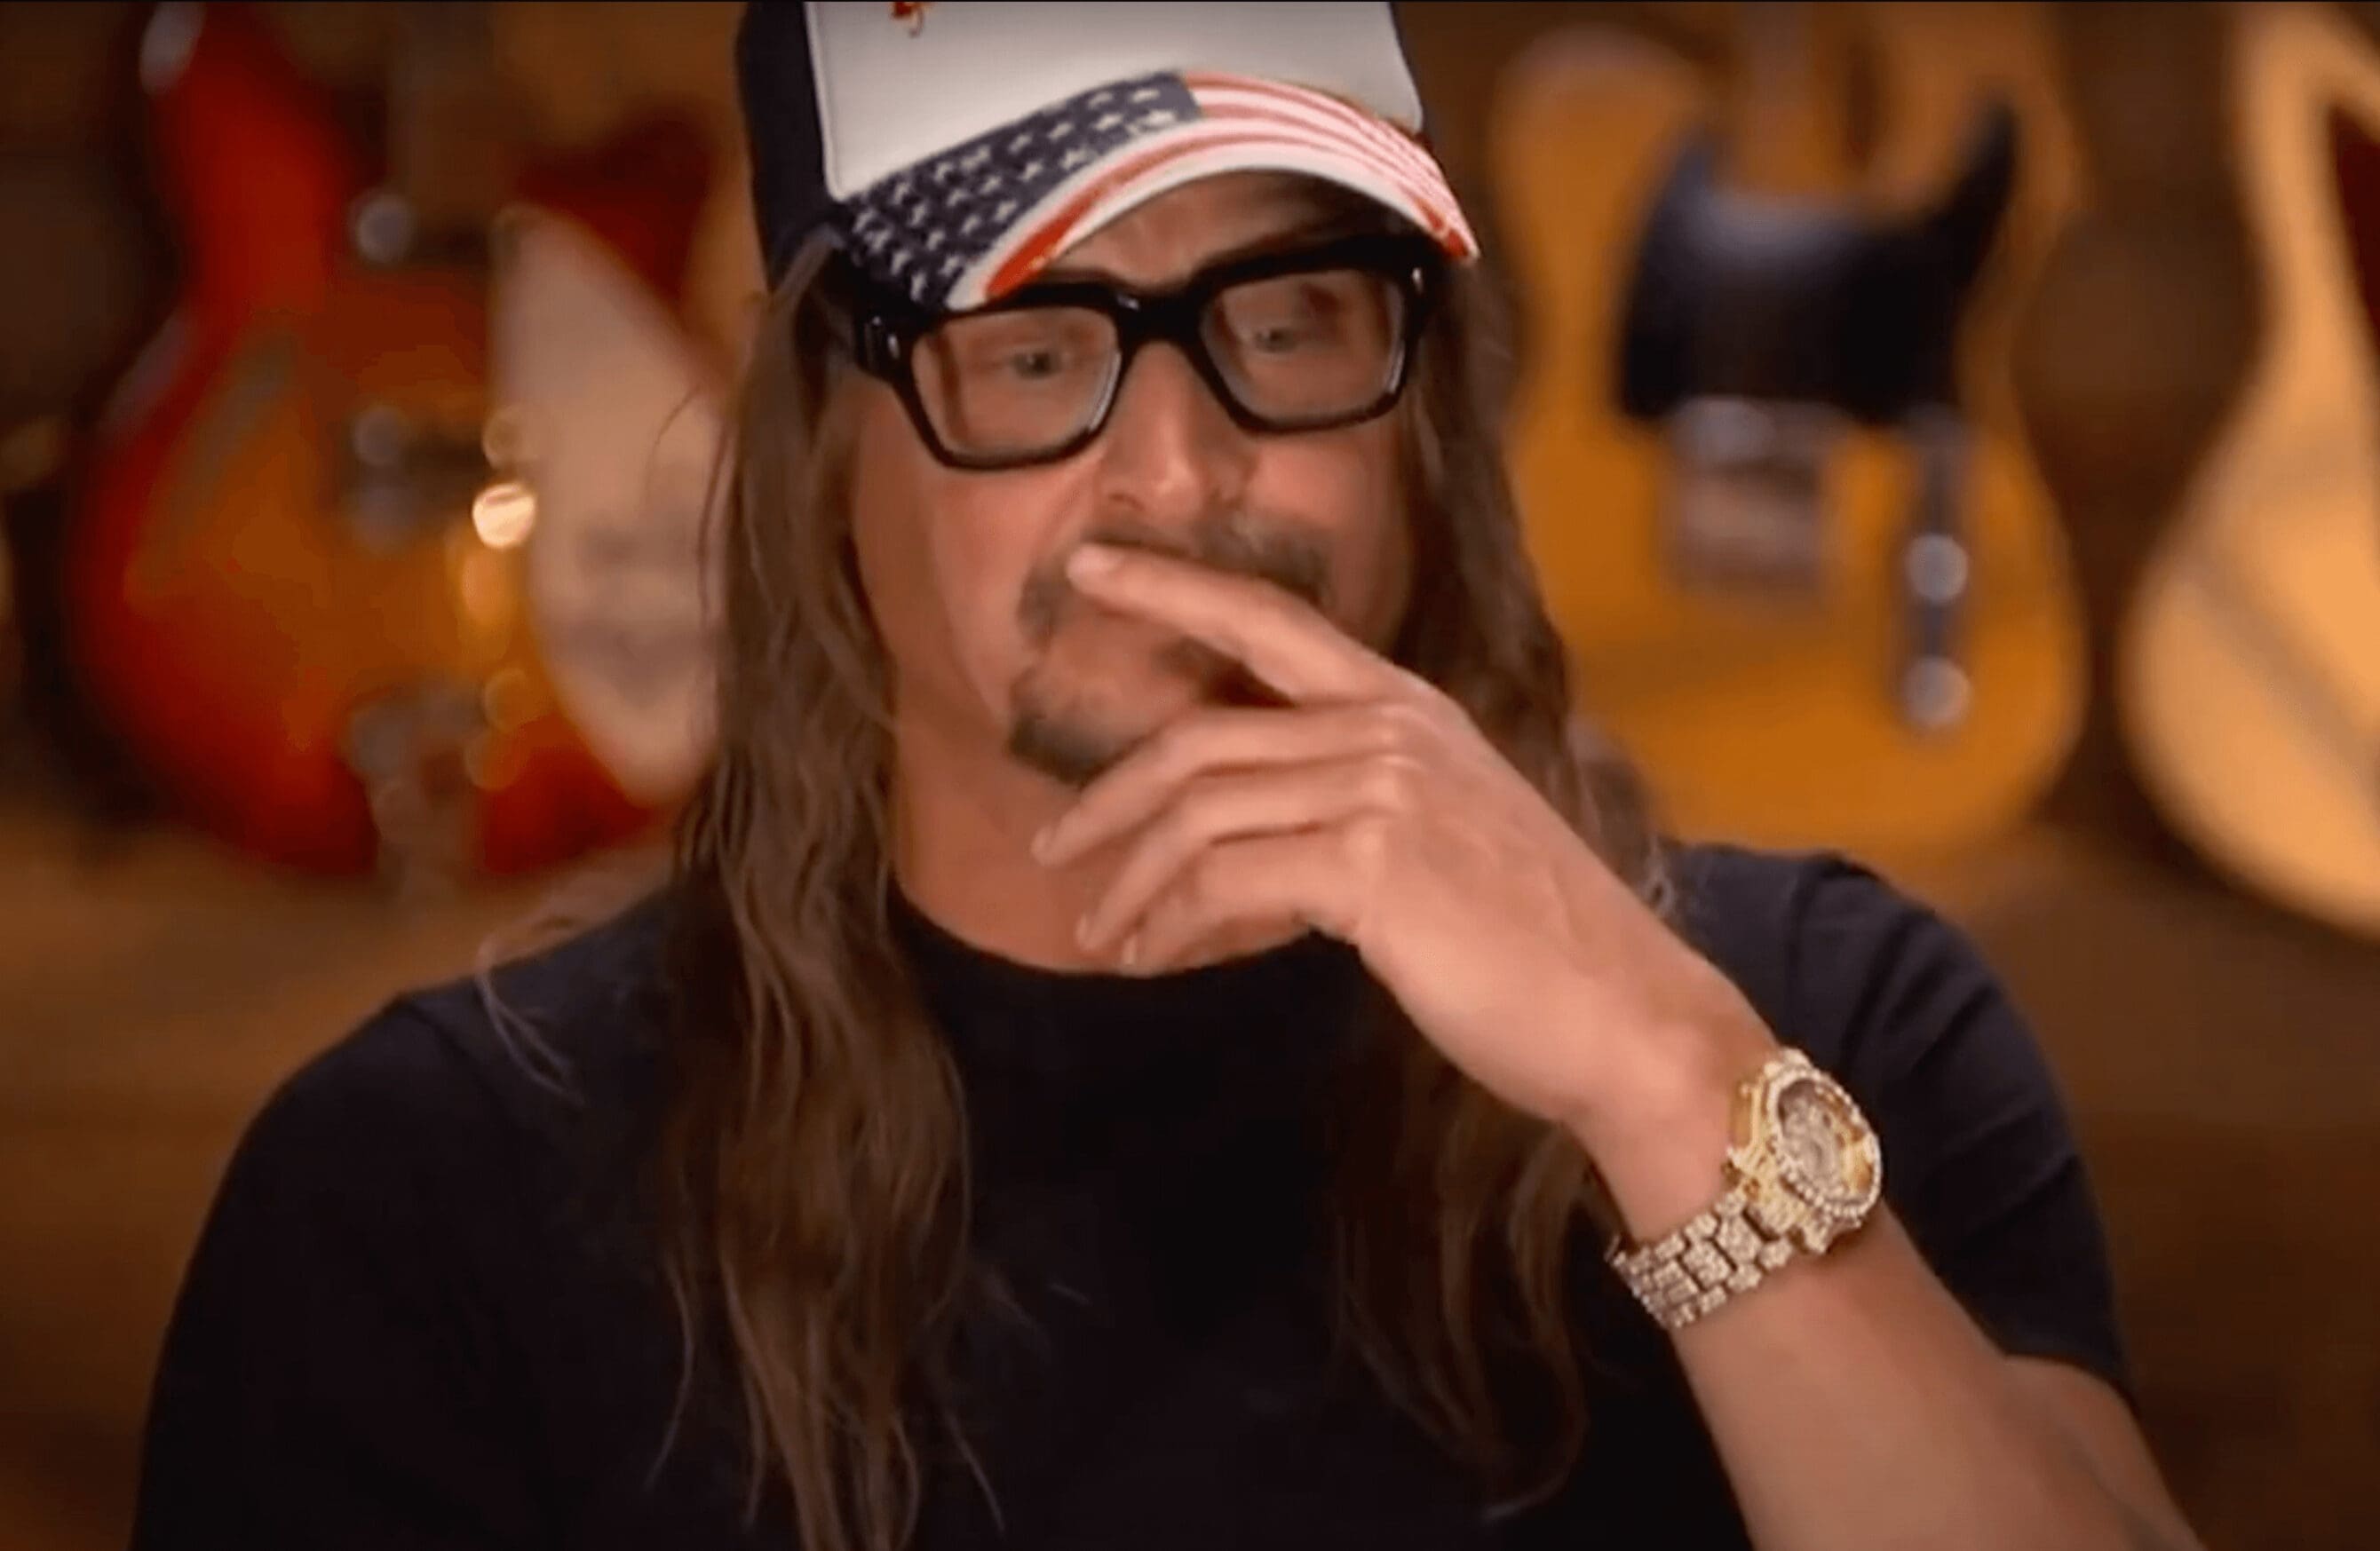 Comedian Shane Gillis reveals Kid Rock loves pranking people by giving them fake watches